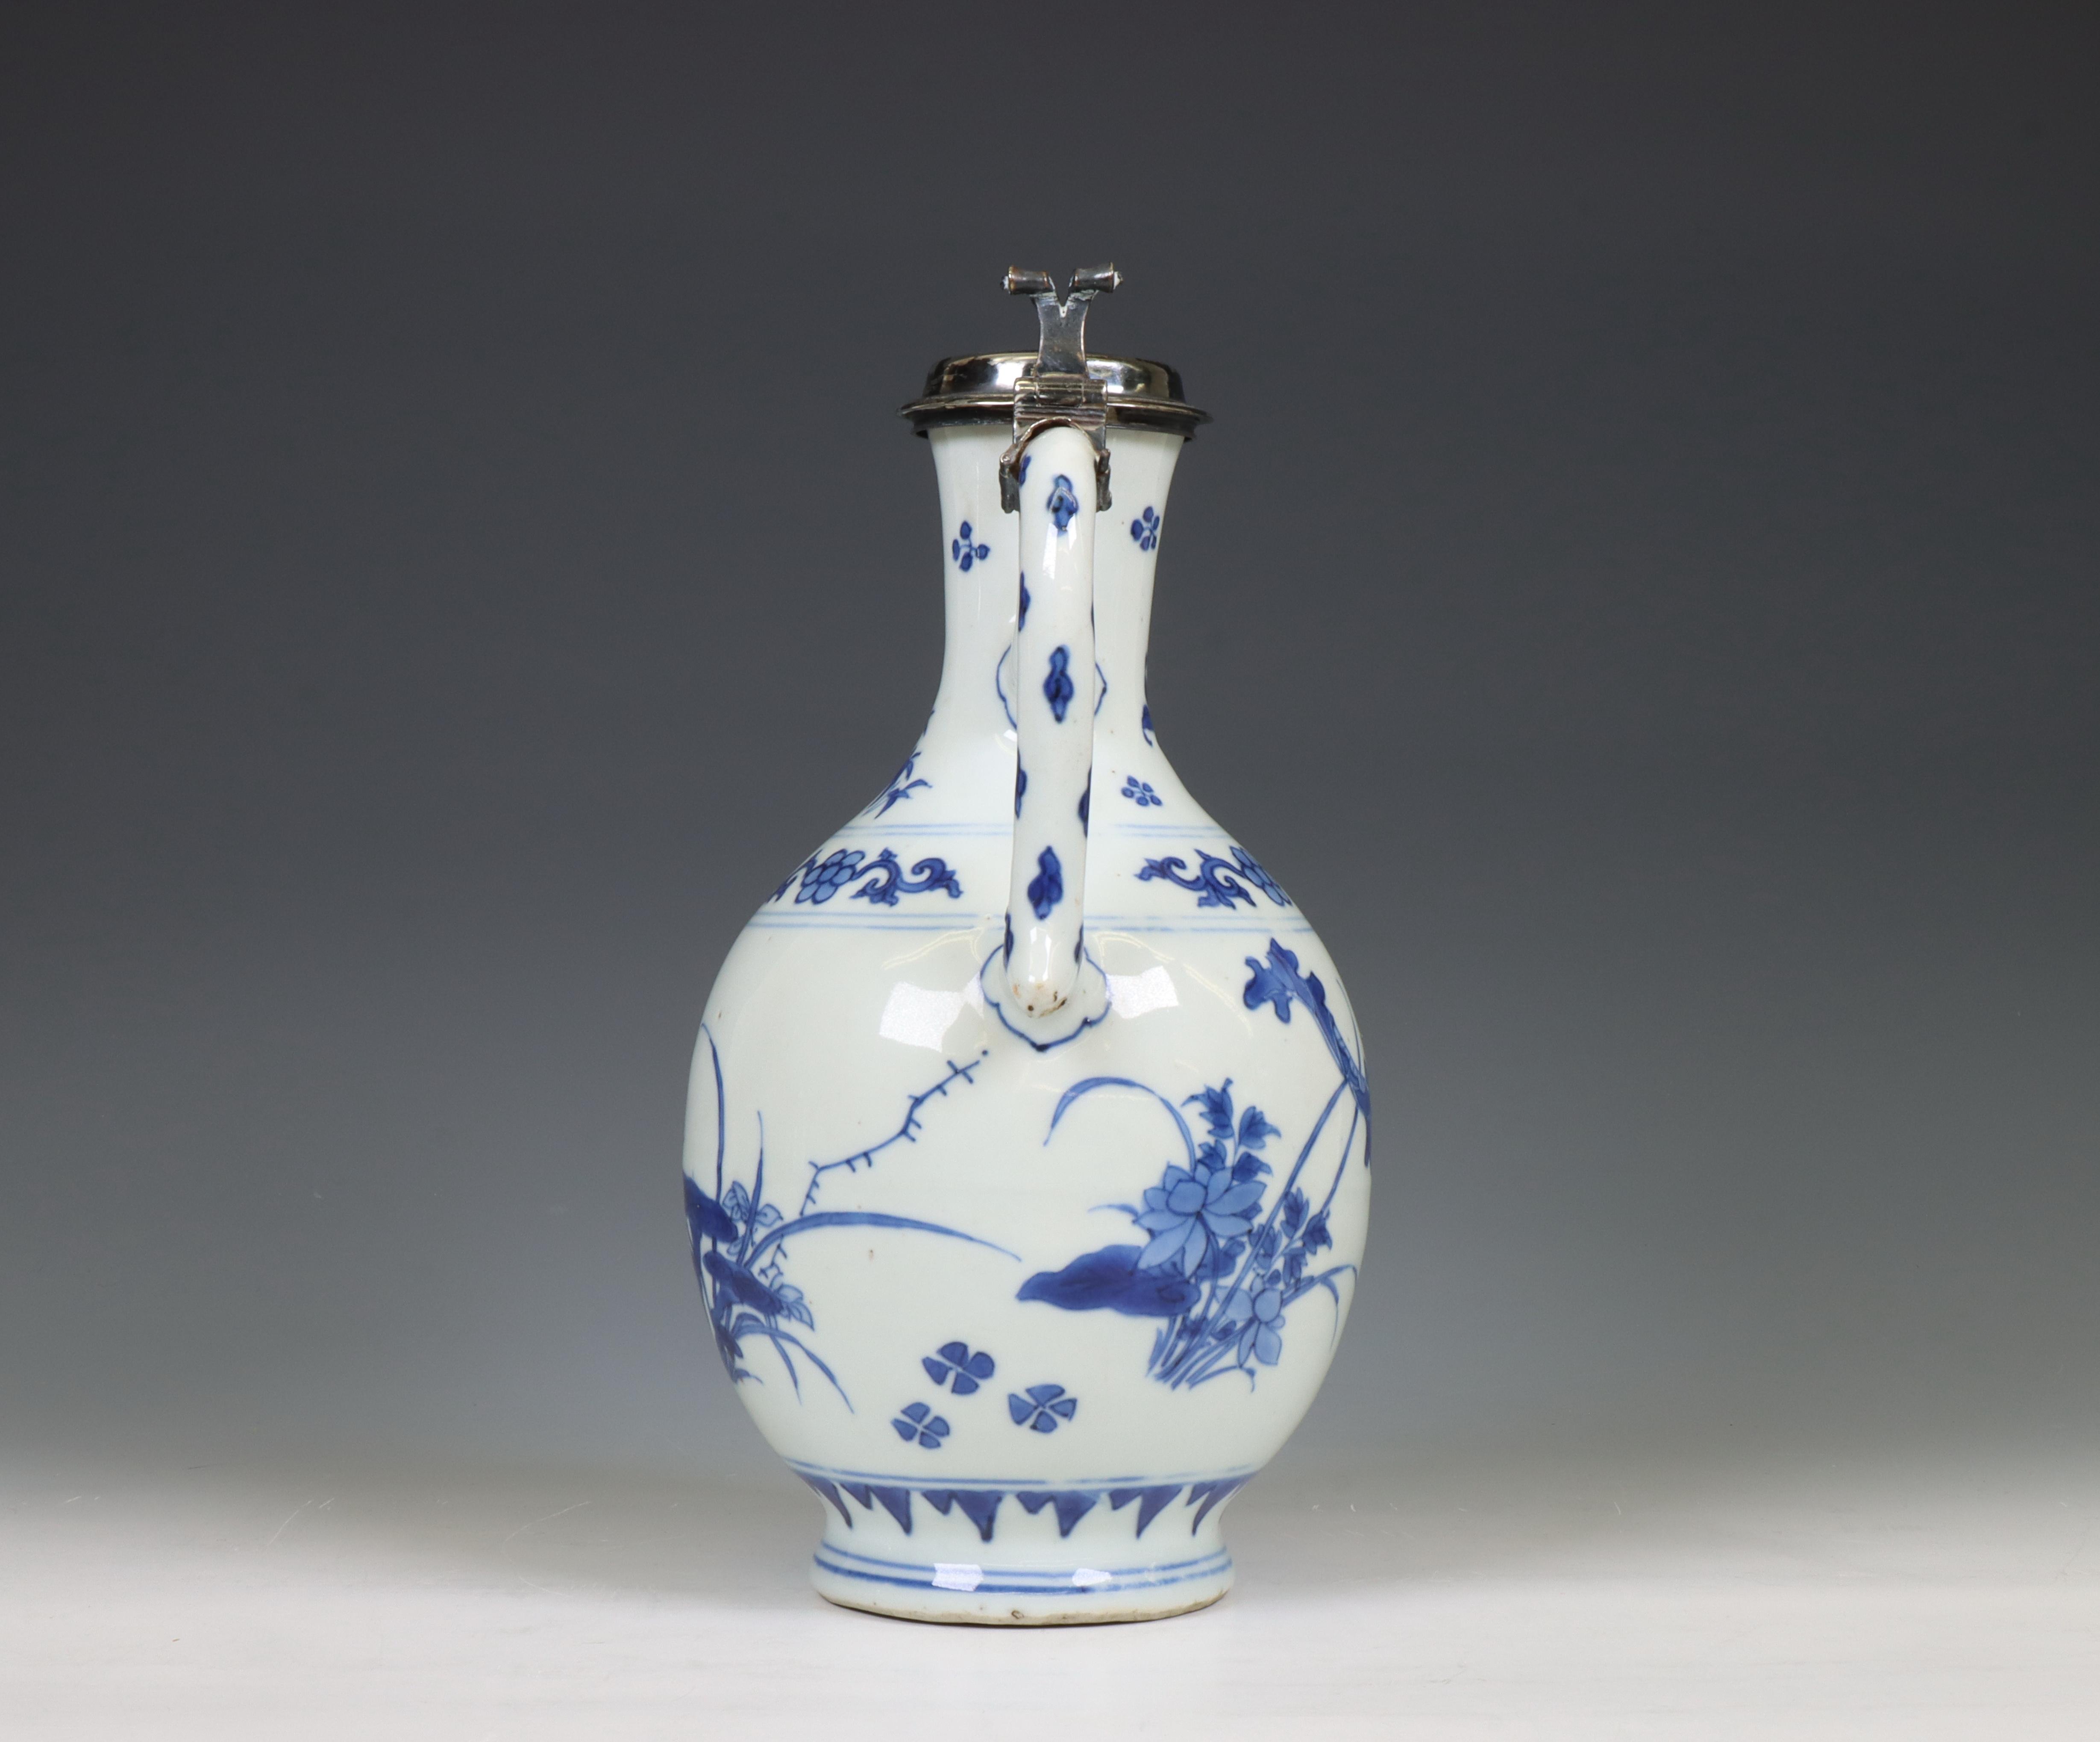 China, a Transitional silver-mounted blue and white porcelain ewer, mid 17th century, the silver lat - Image 6 of 6